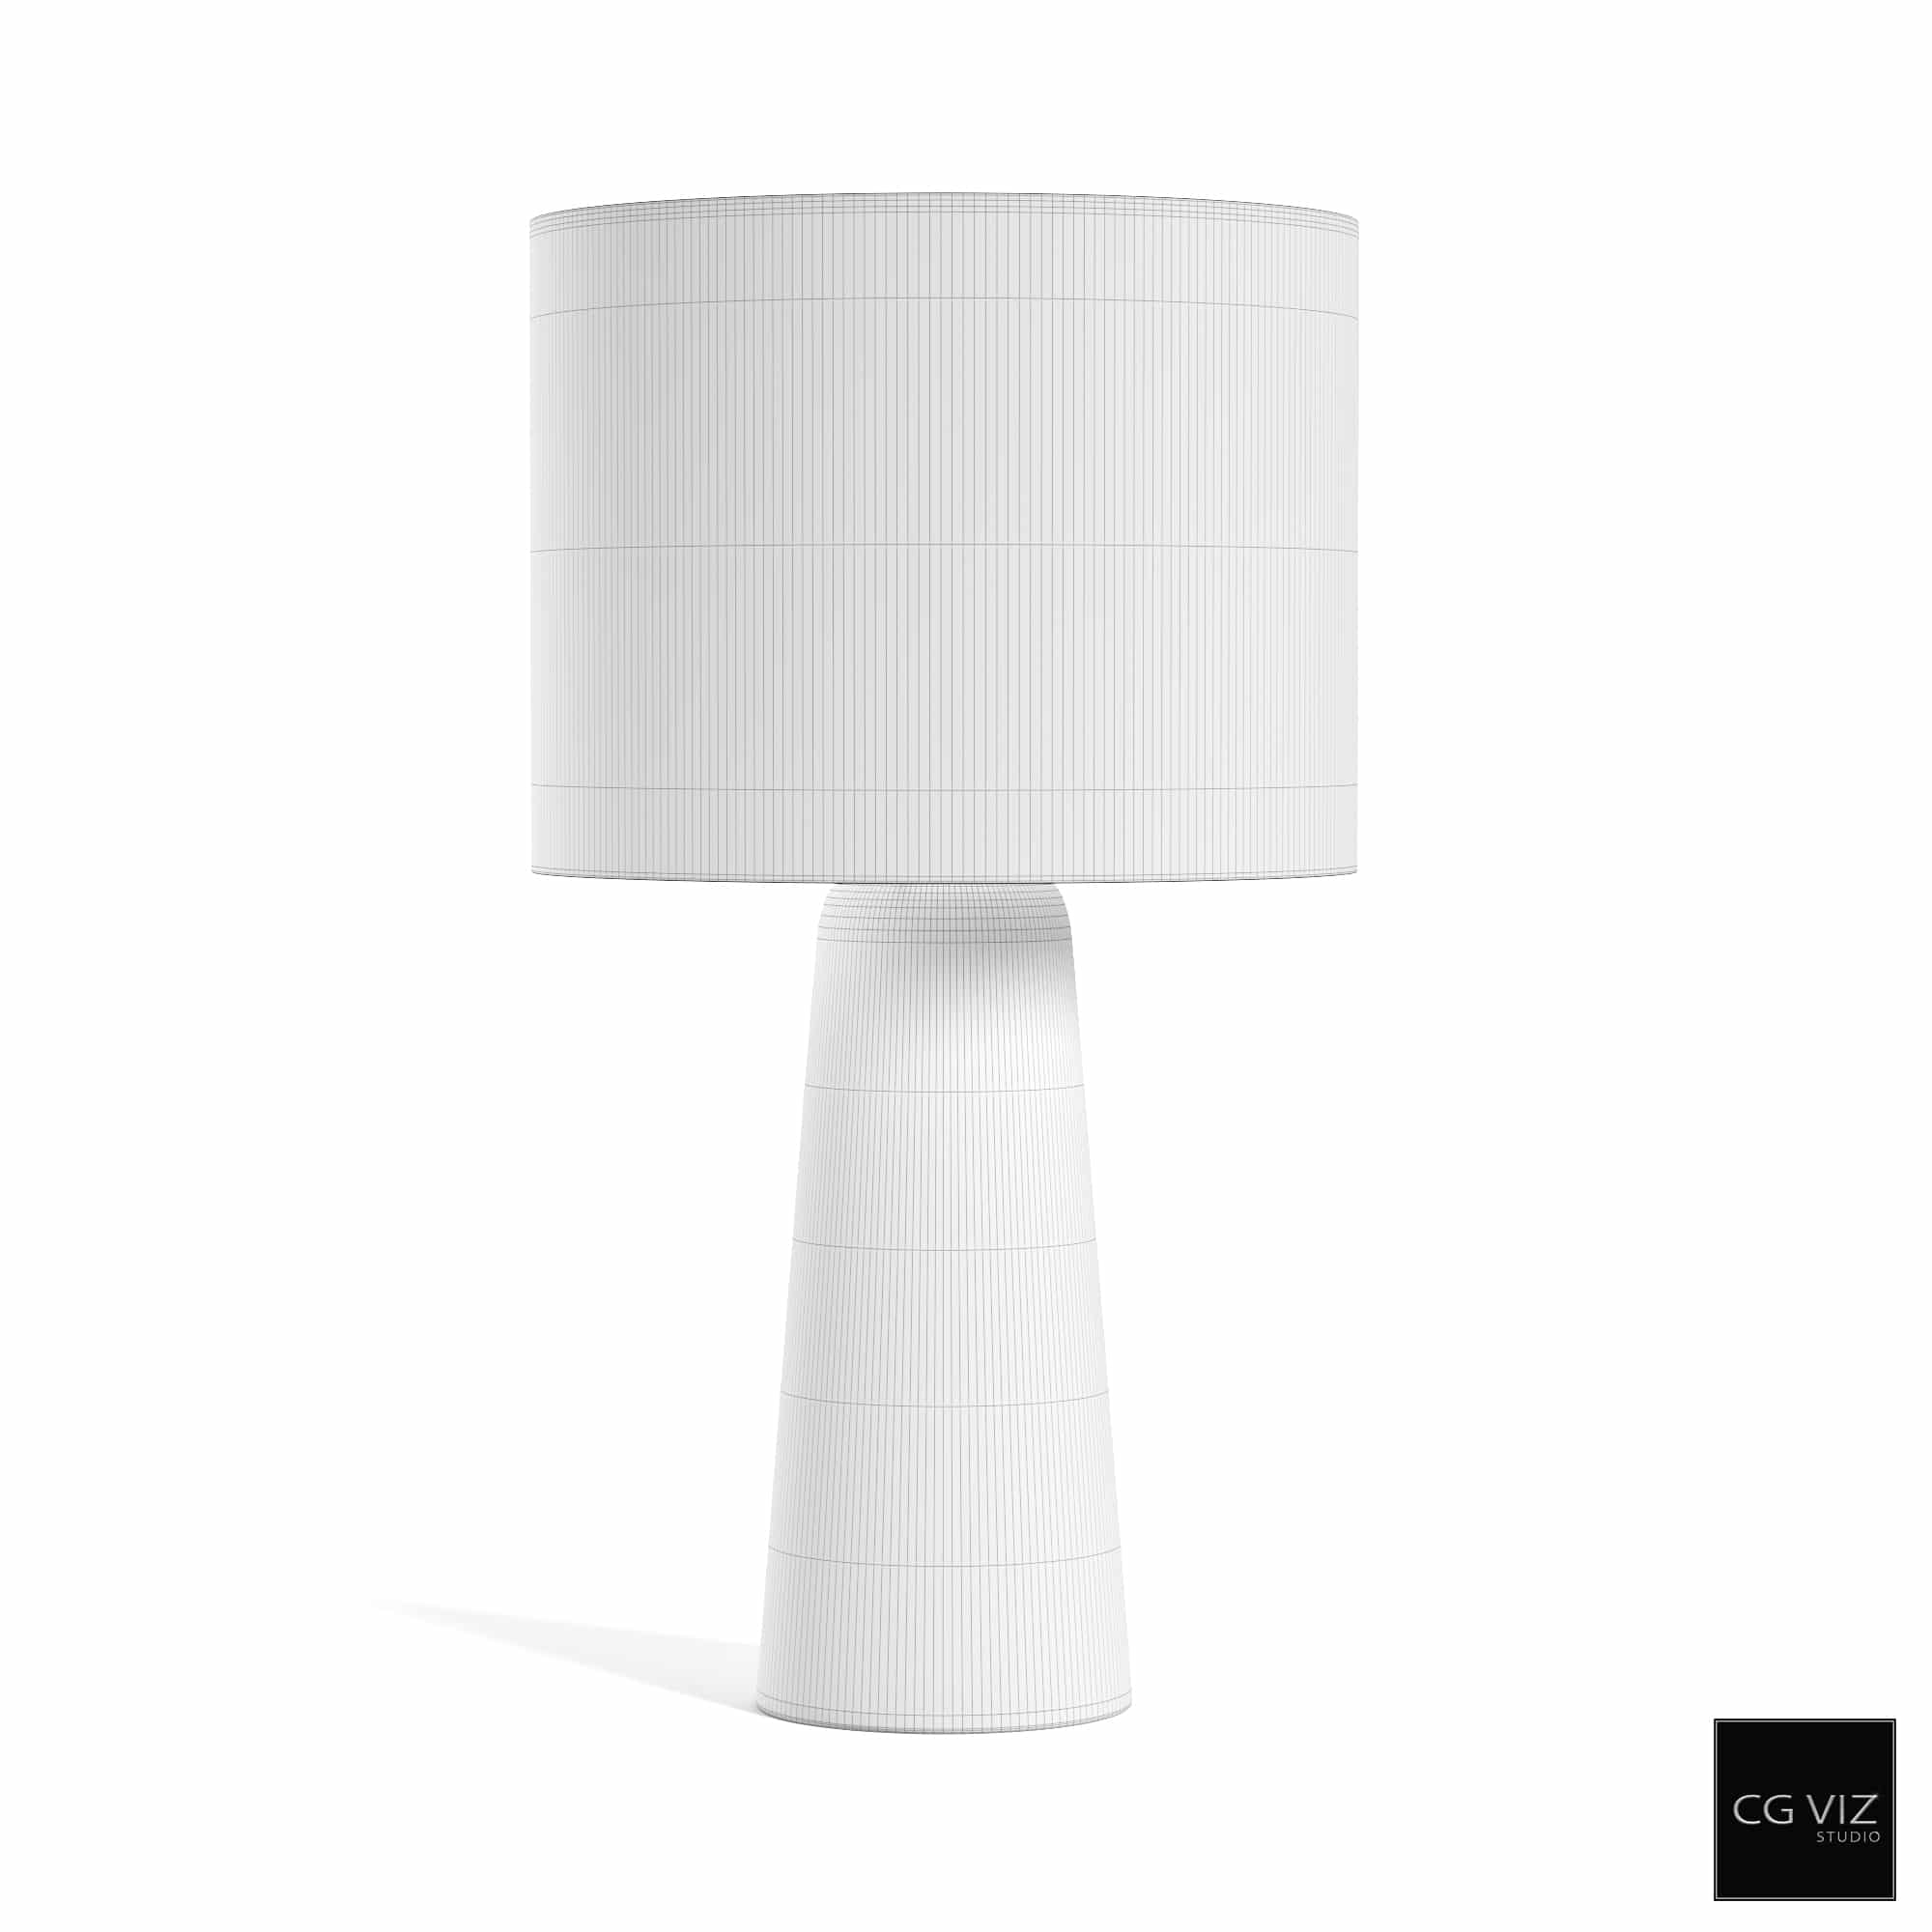 Wireframe View of BoConcept Dawn Table Lamp by CGVIZSTUDIO